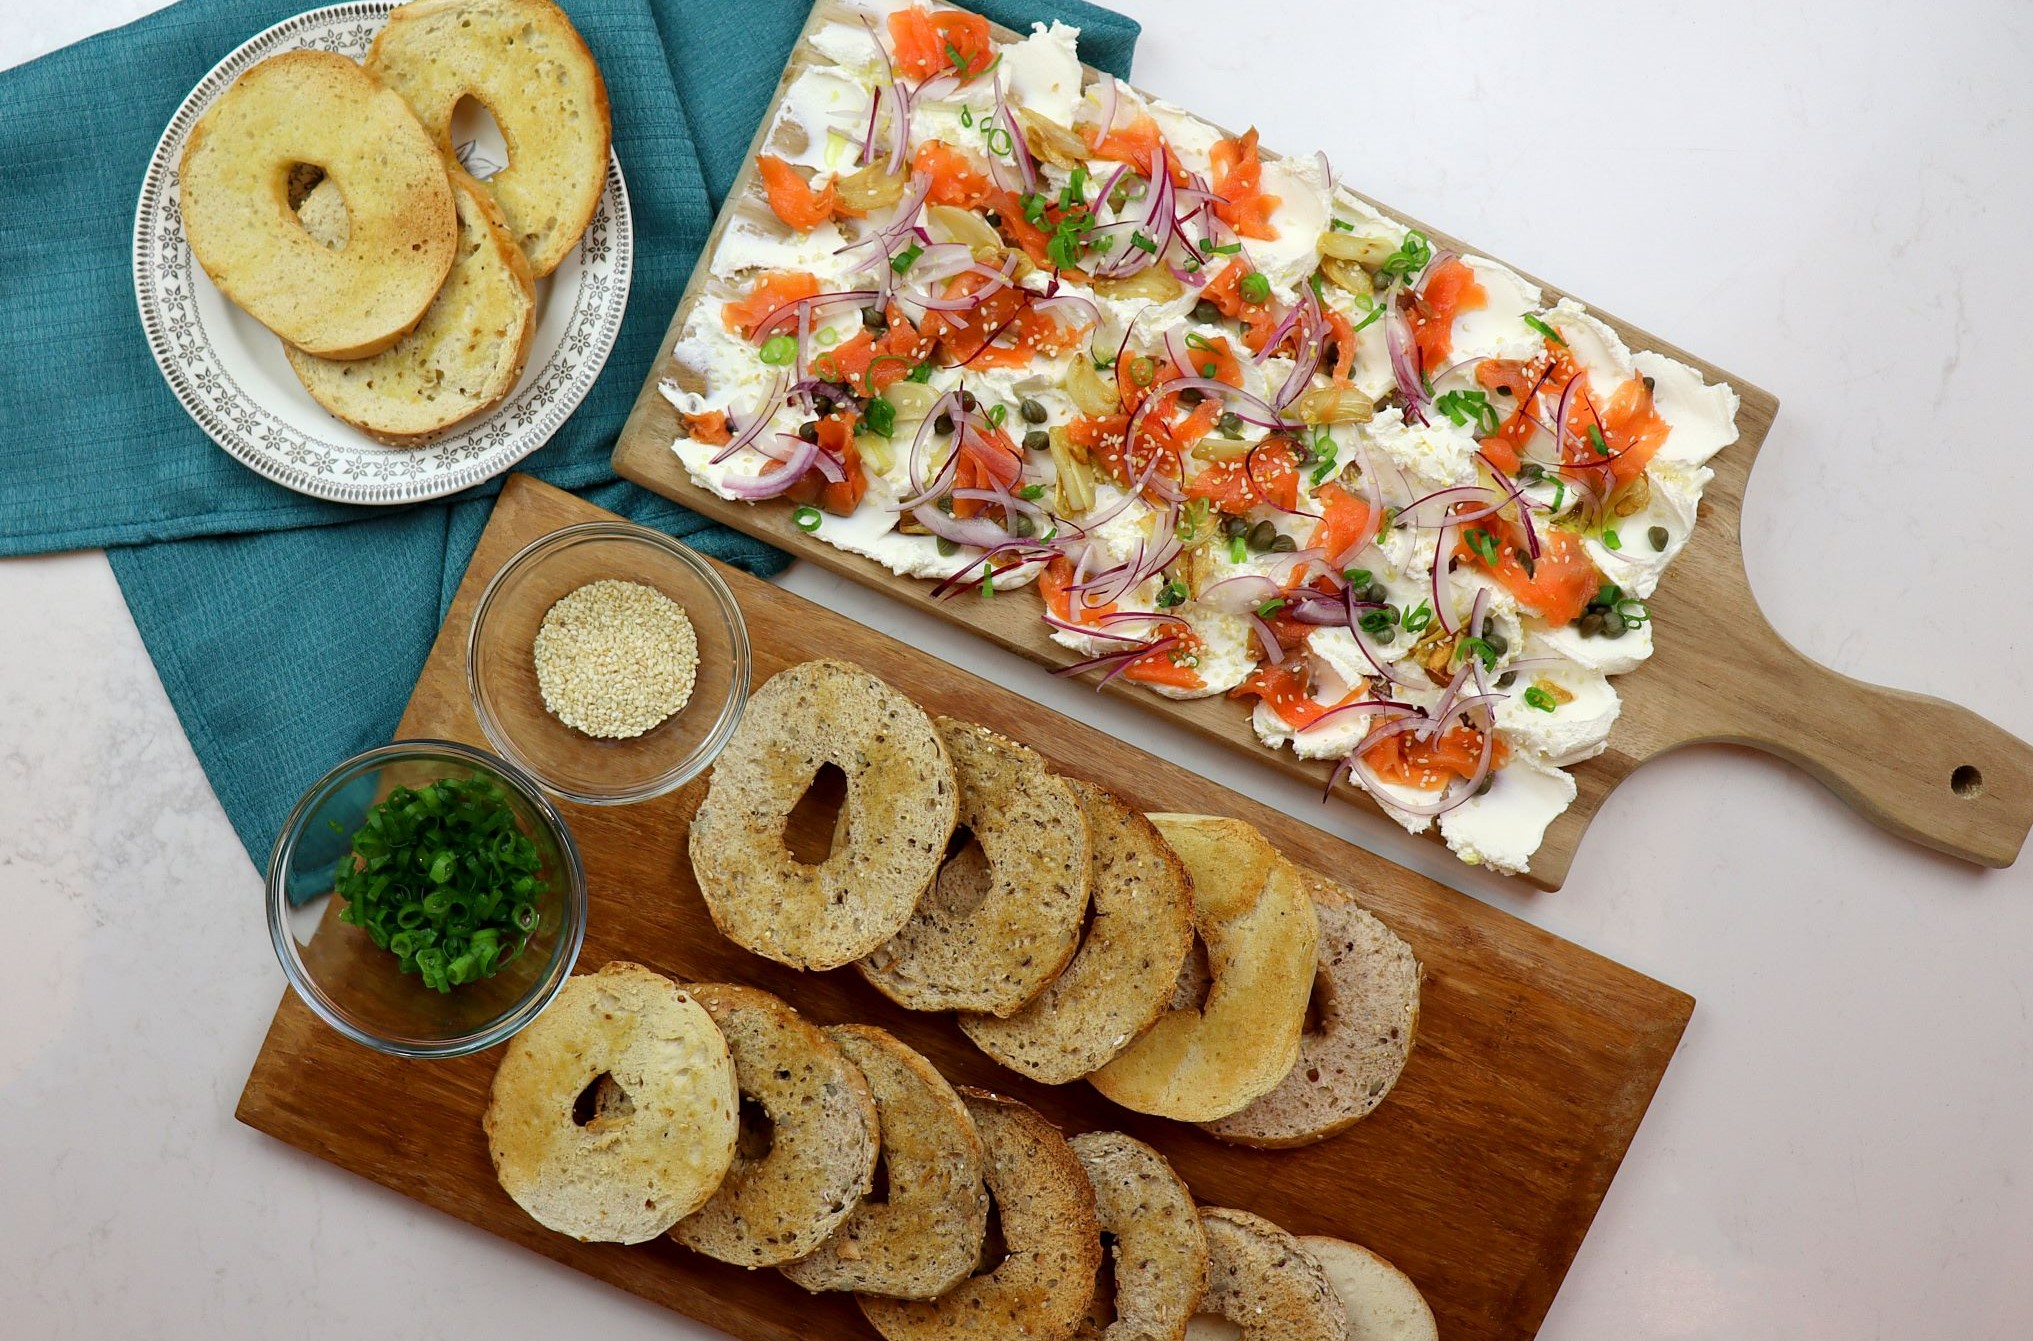 CREAM CHEESE SMOKED SALMON BOARD WITH BAGEL CHIPS